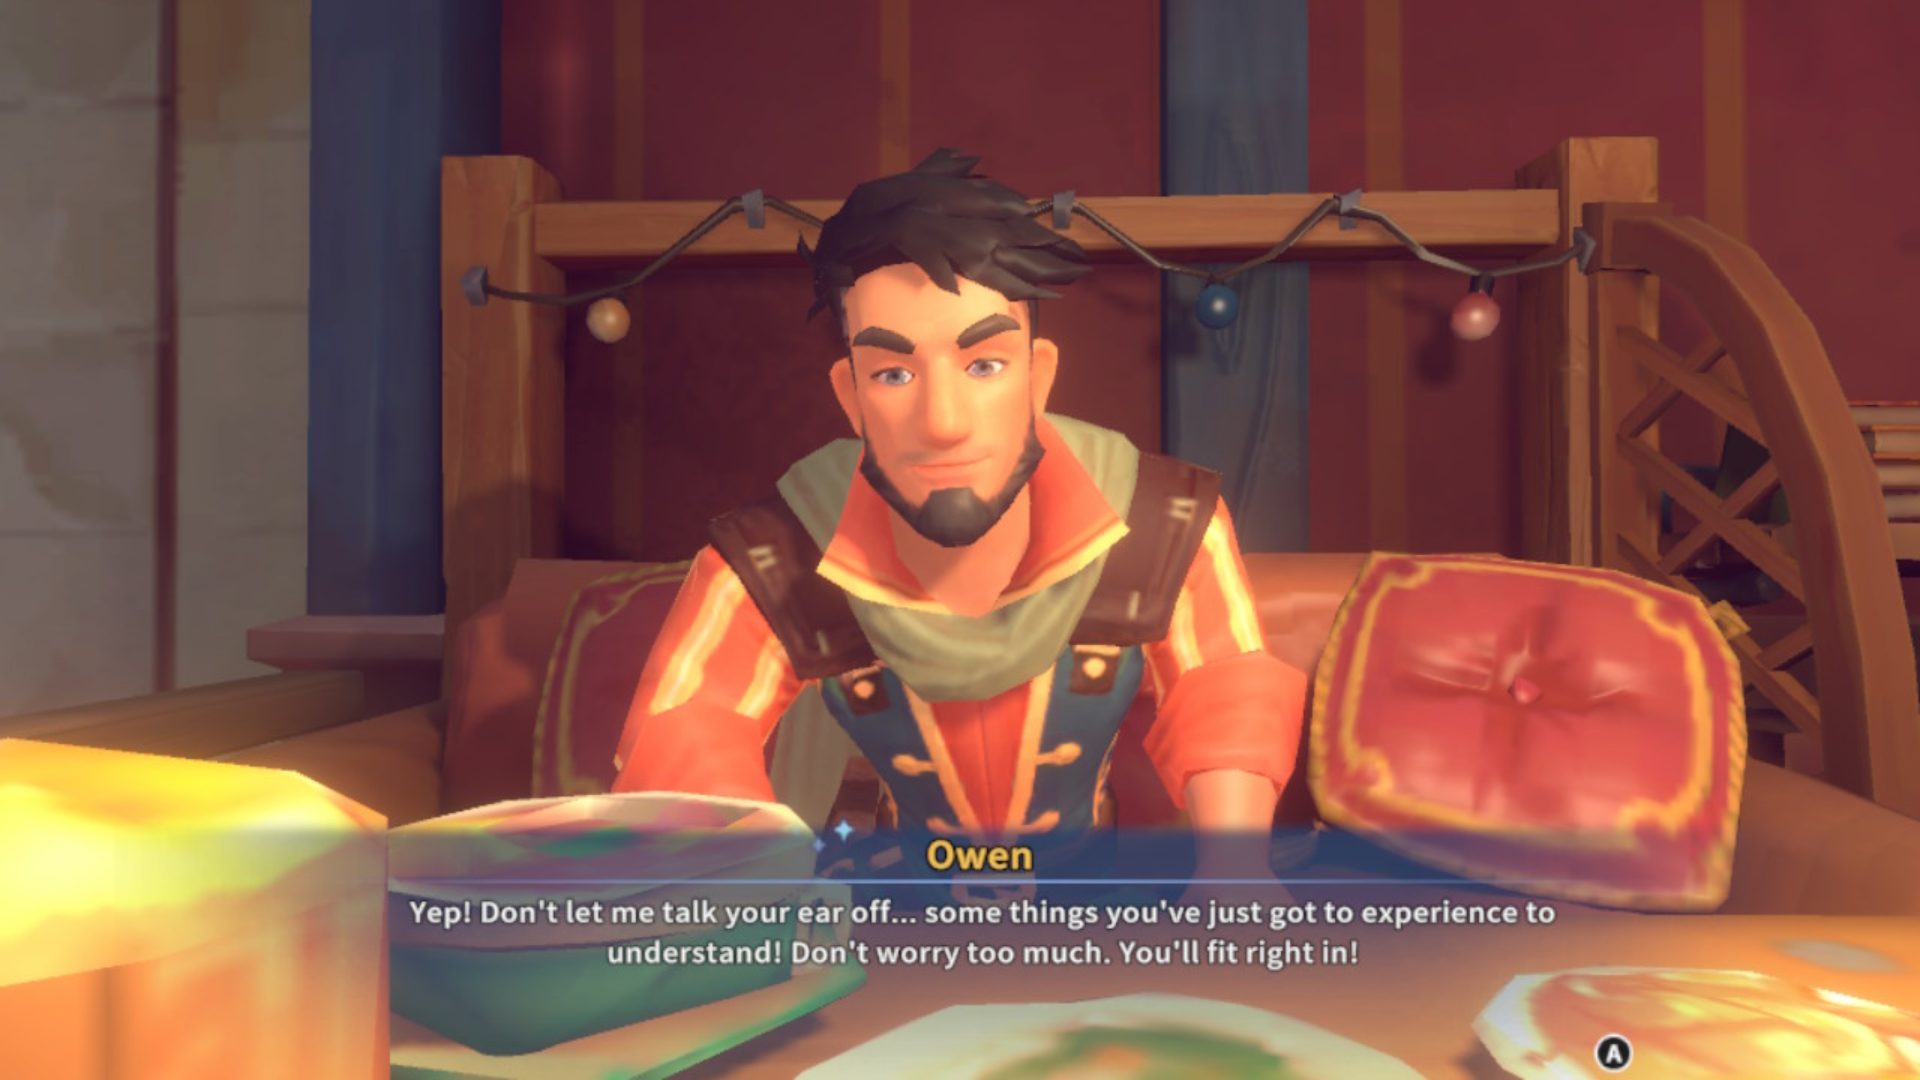 The NPC Owen talking to the player in My Time at Sandrock